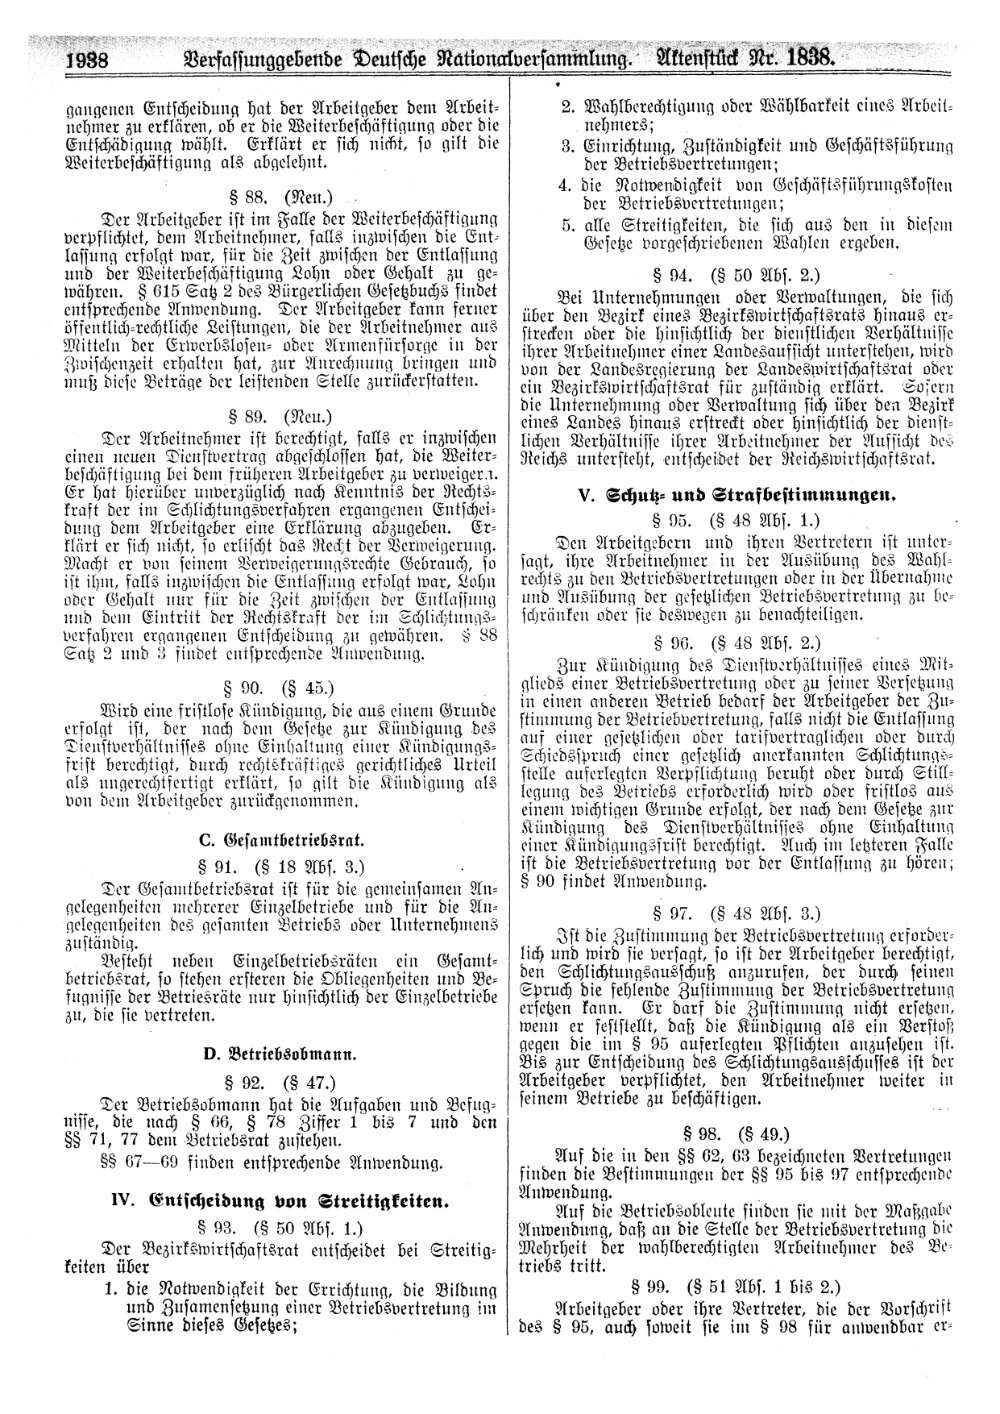 Scan of page 1938